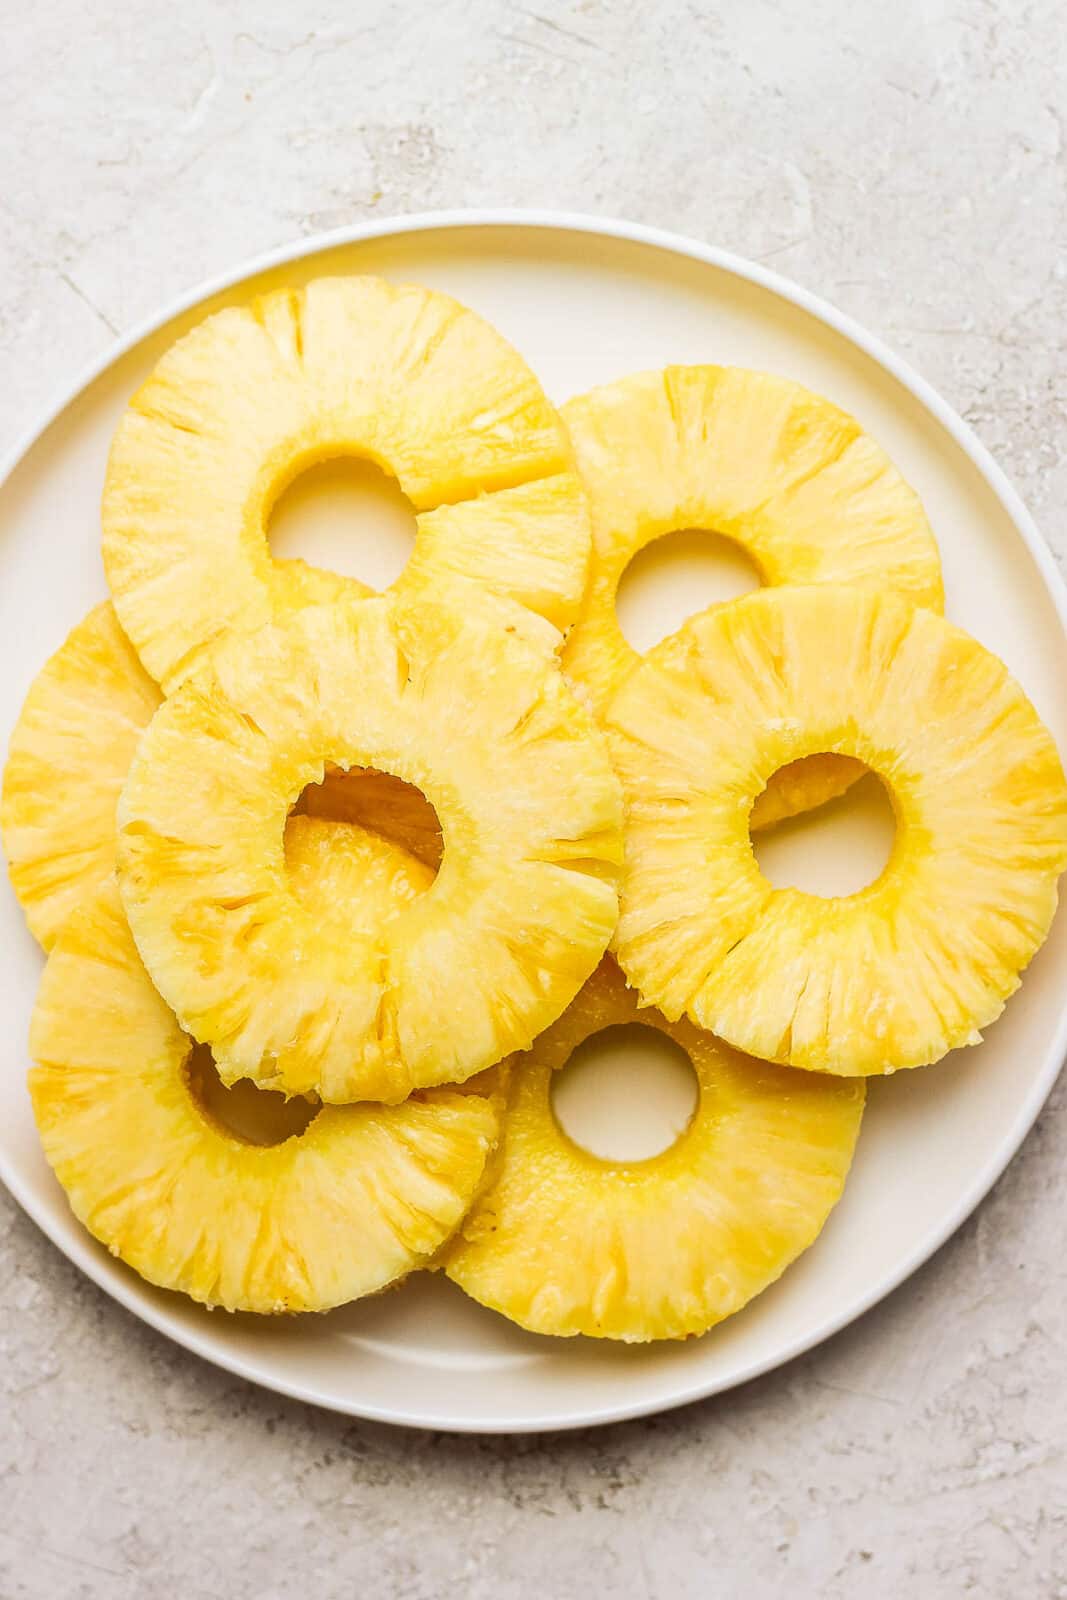 Pineapple slices brushed with olive oil and honey on a plate.